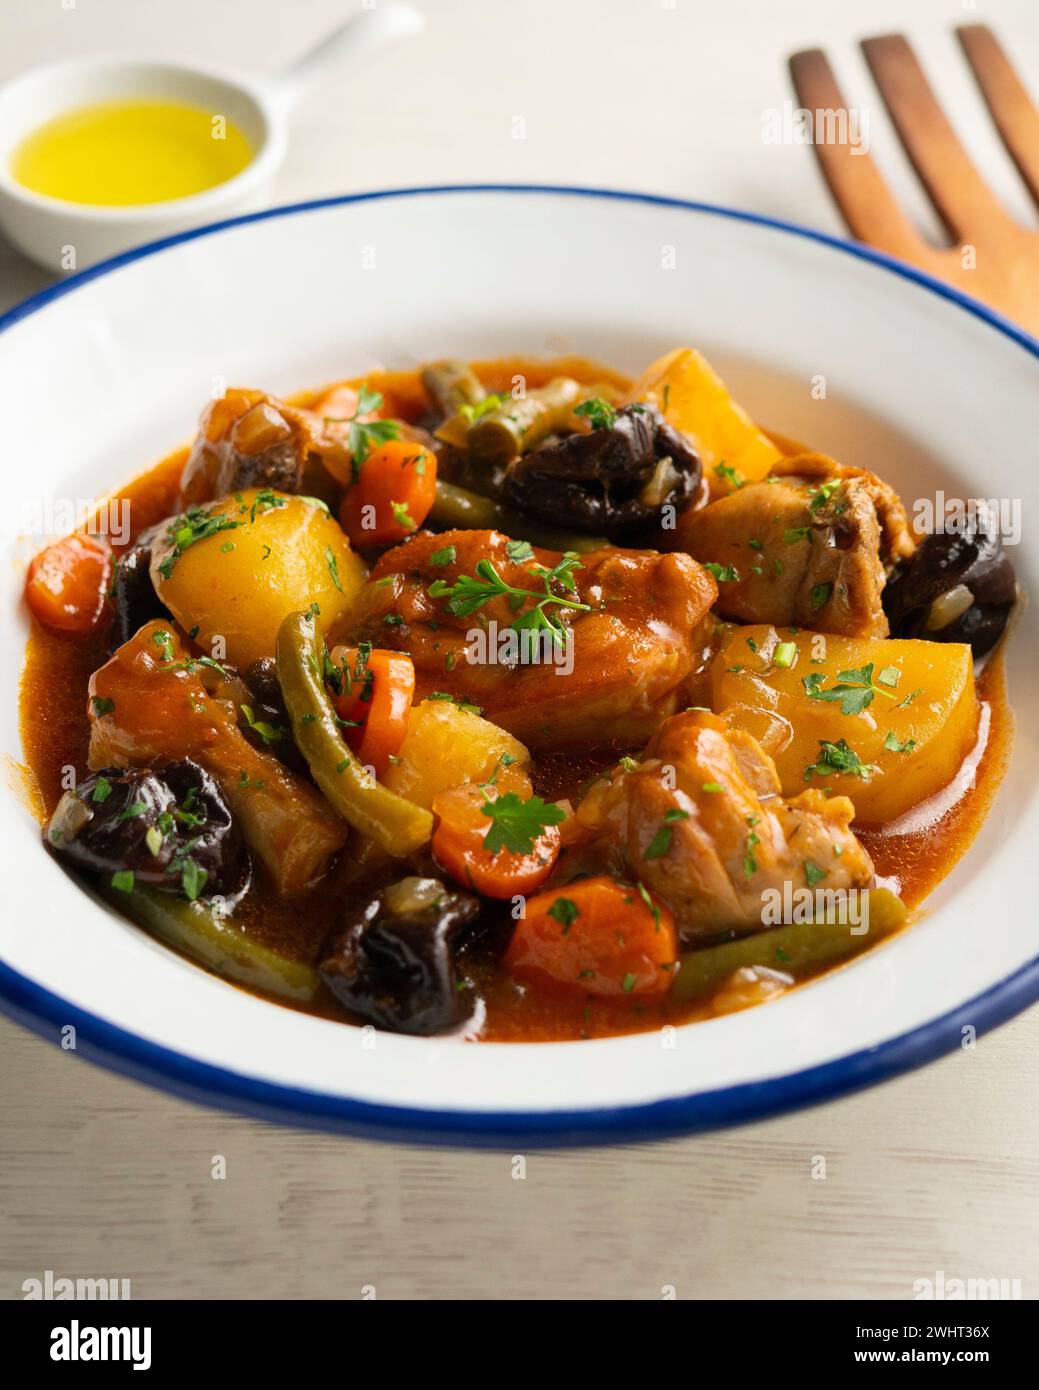 Stewed rabbit with potatoes, green beans, carrots and tomato. Stock Photo